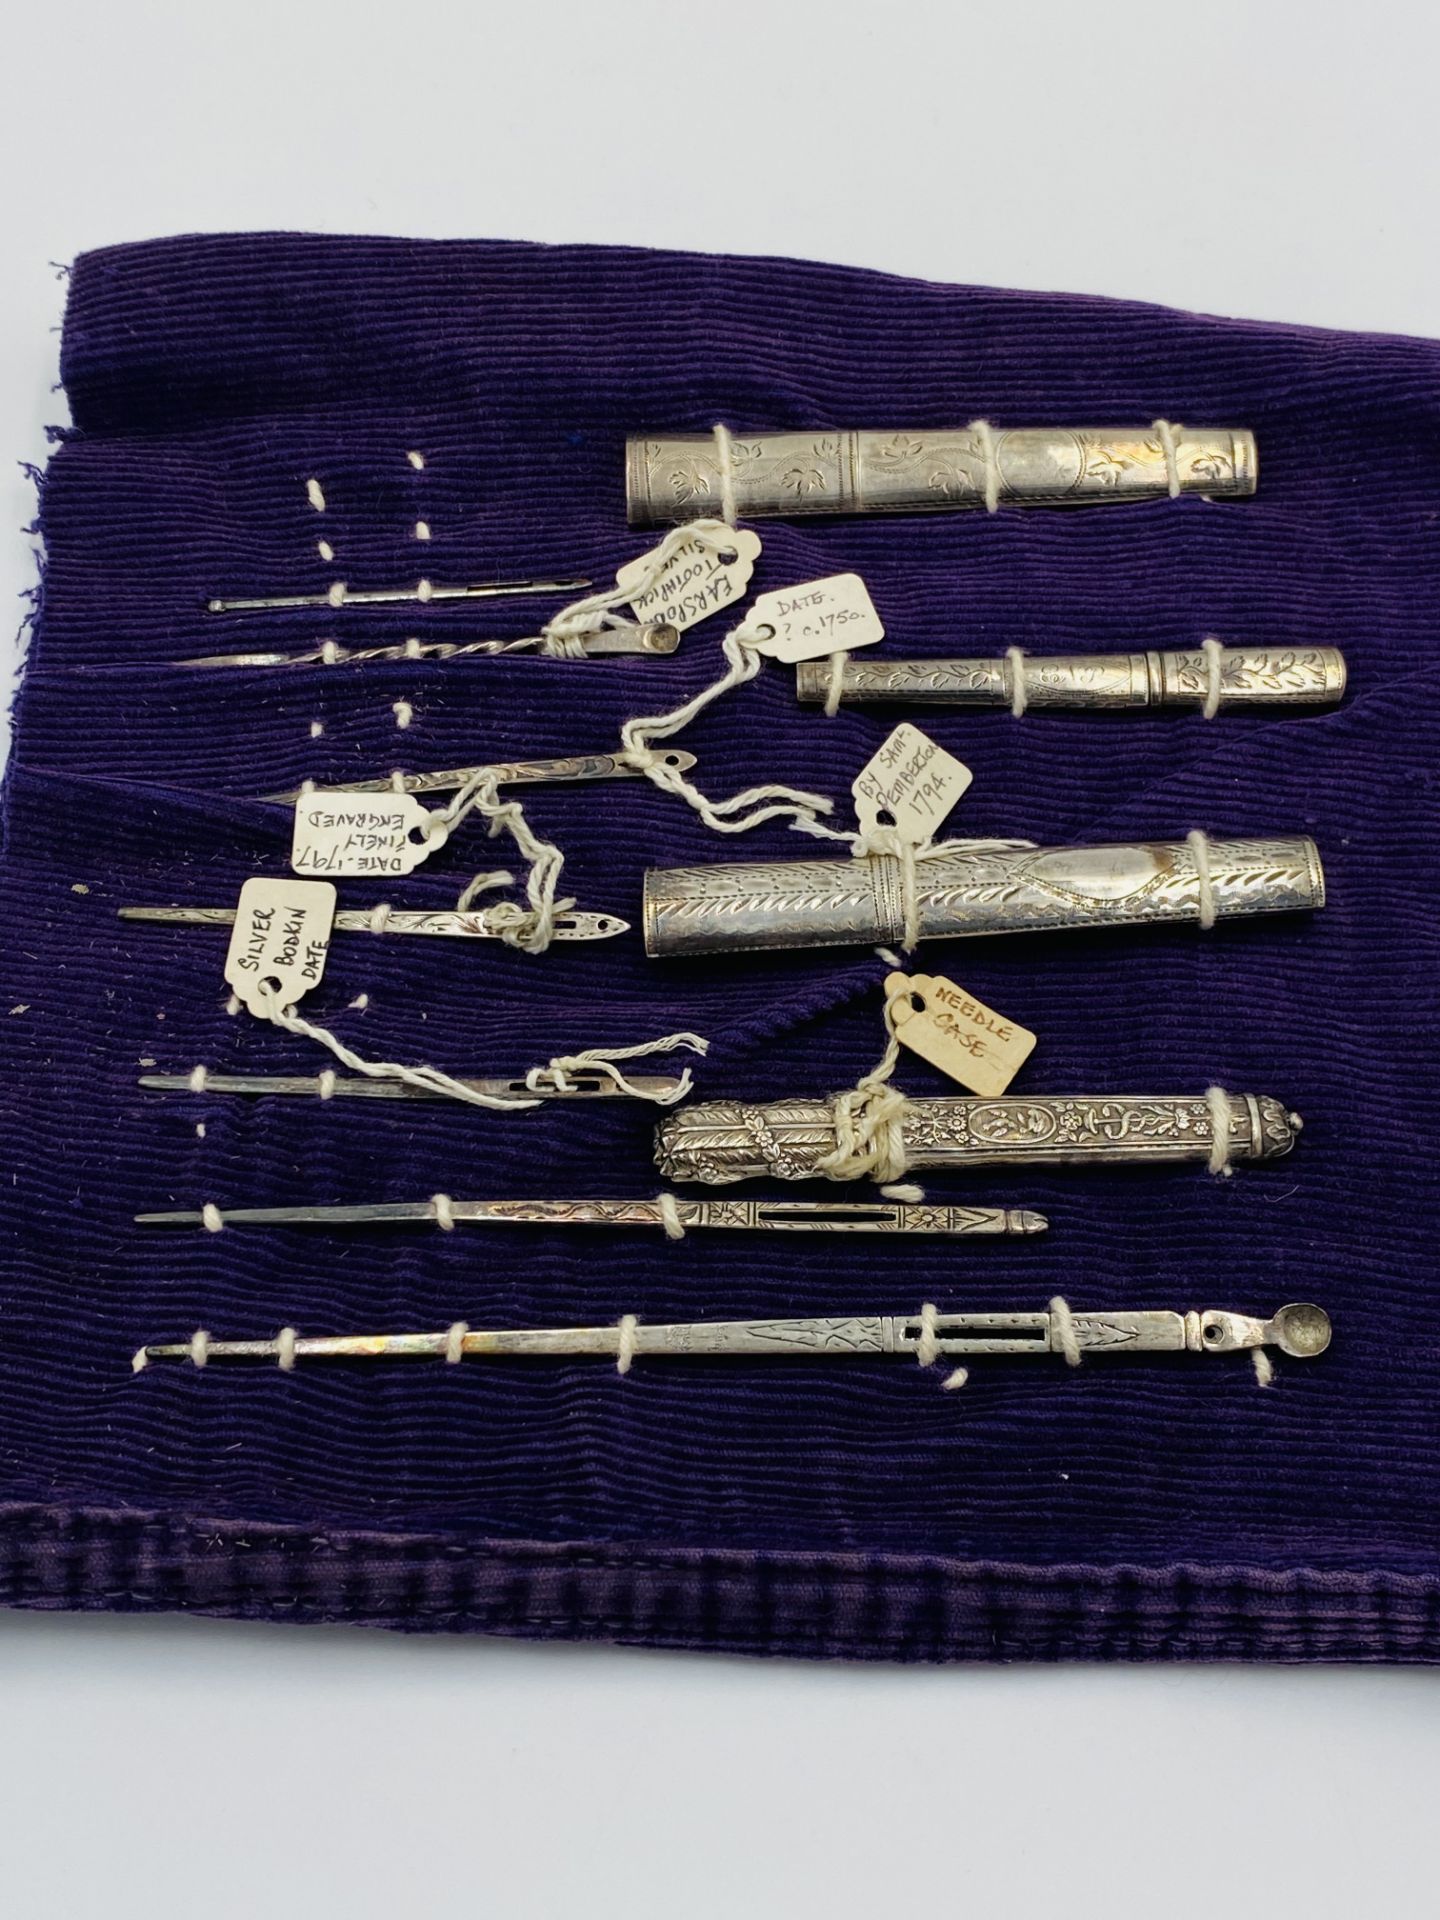 A collection of silver needle cases and bodkins - Image 3 of 5